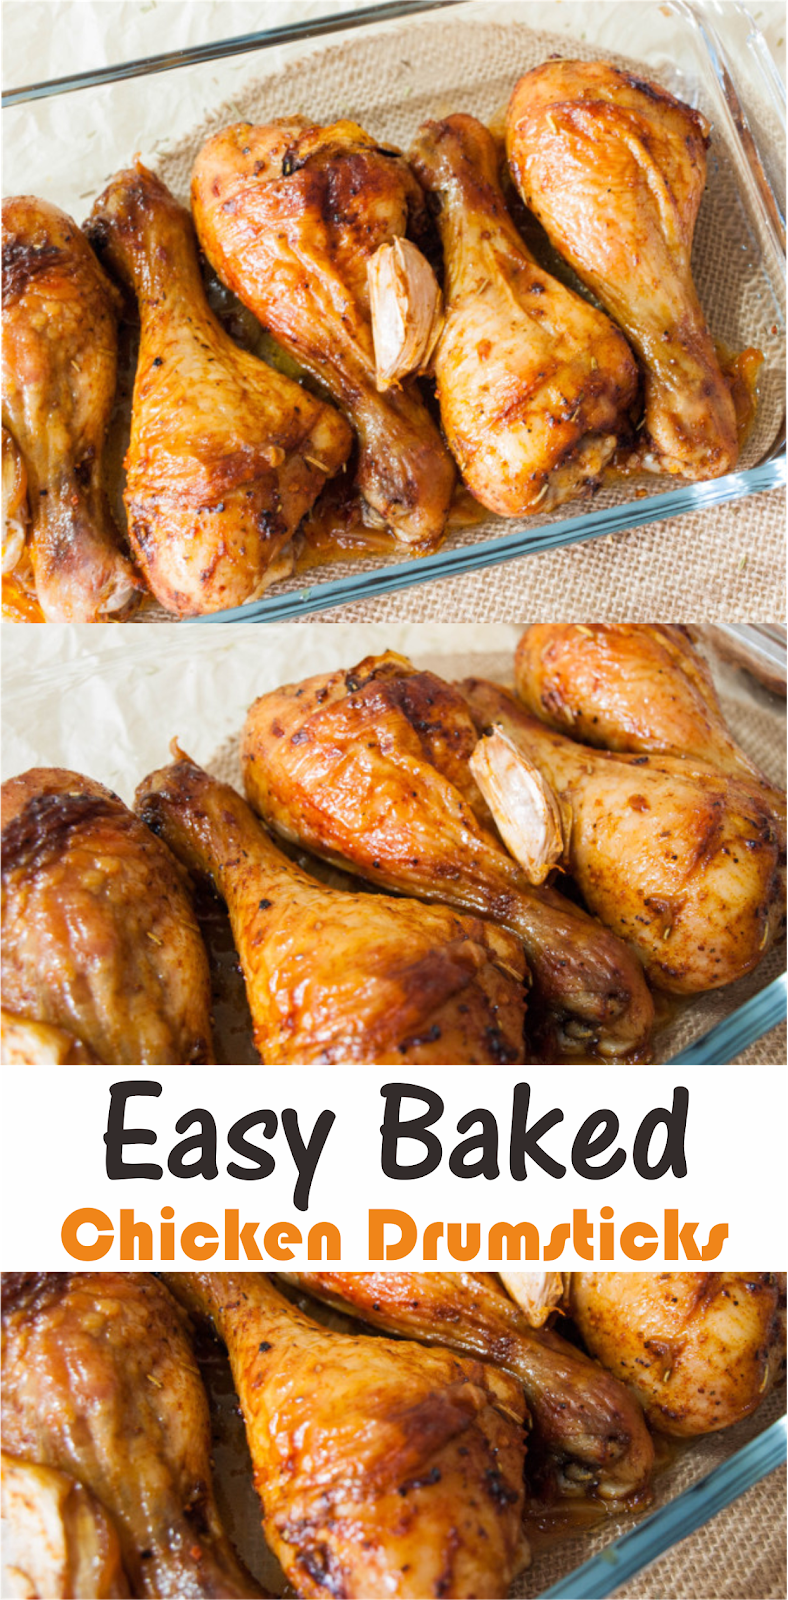 Easy Baked Chicken Drumsticks | Think food